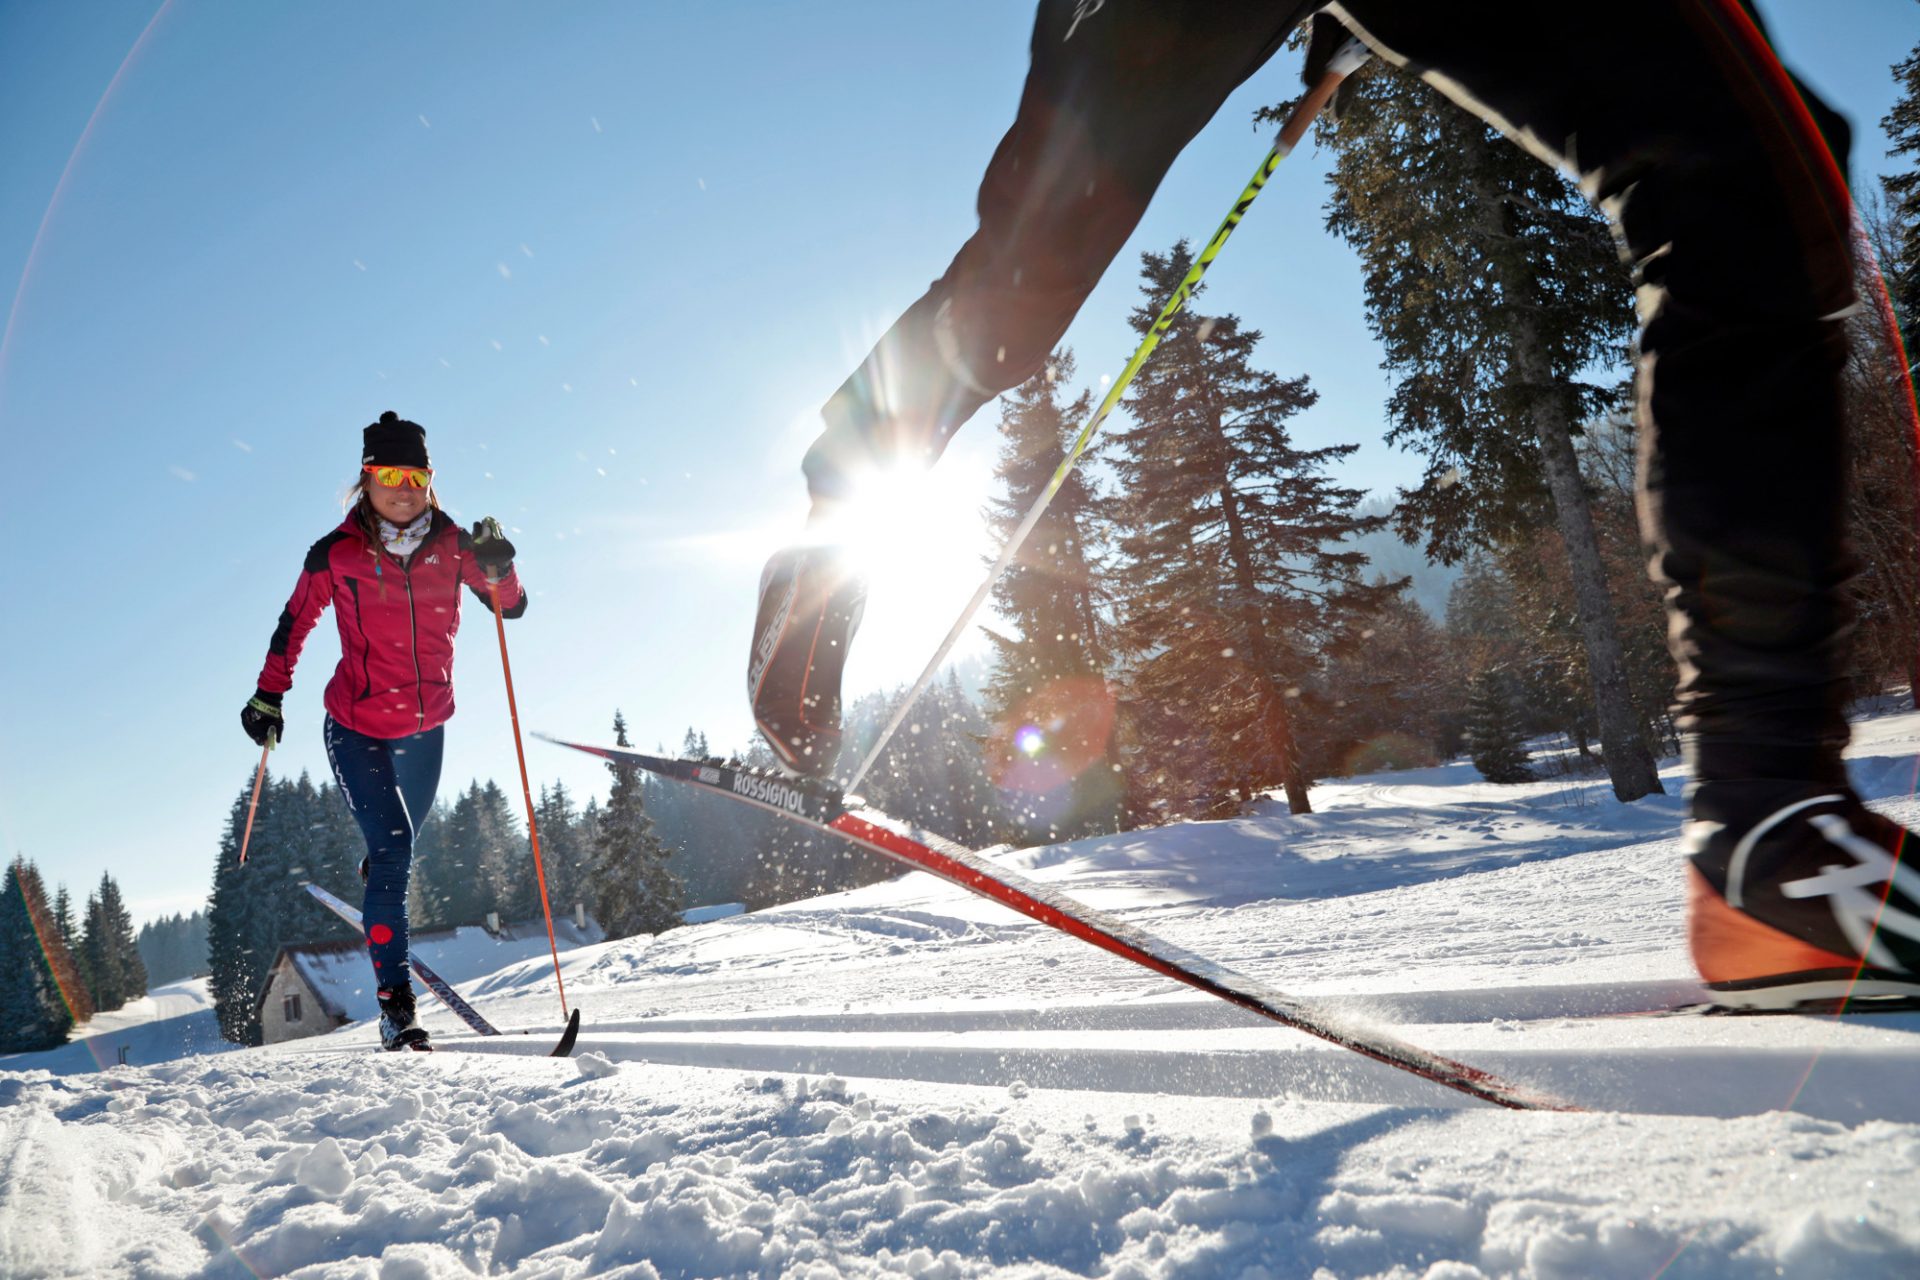 Where Did Cross Country Skiing Originated?